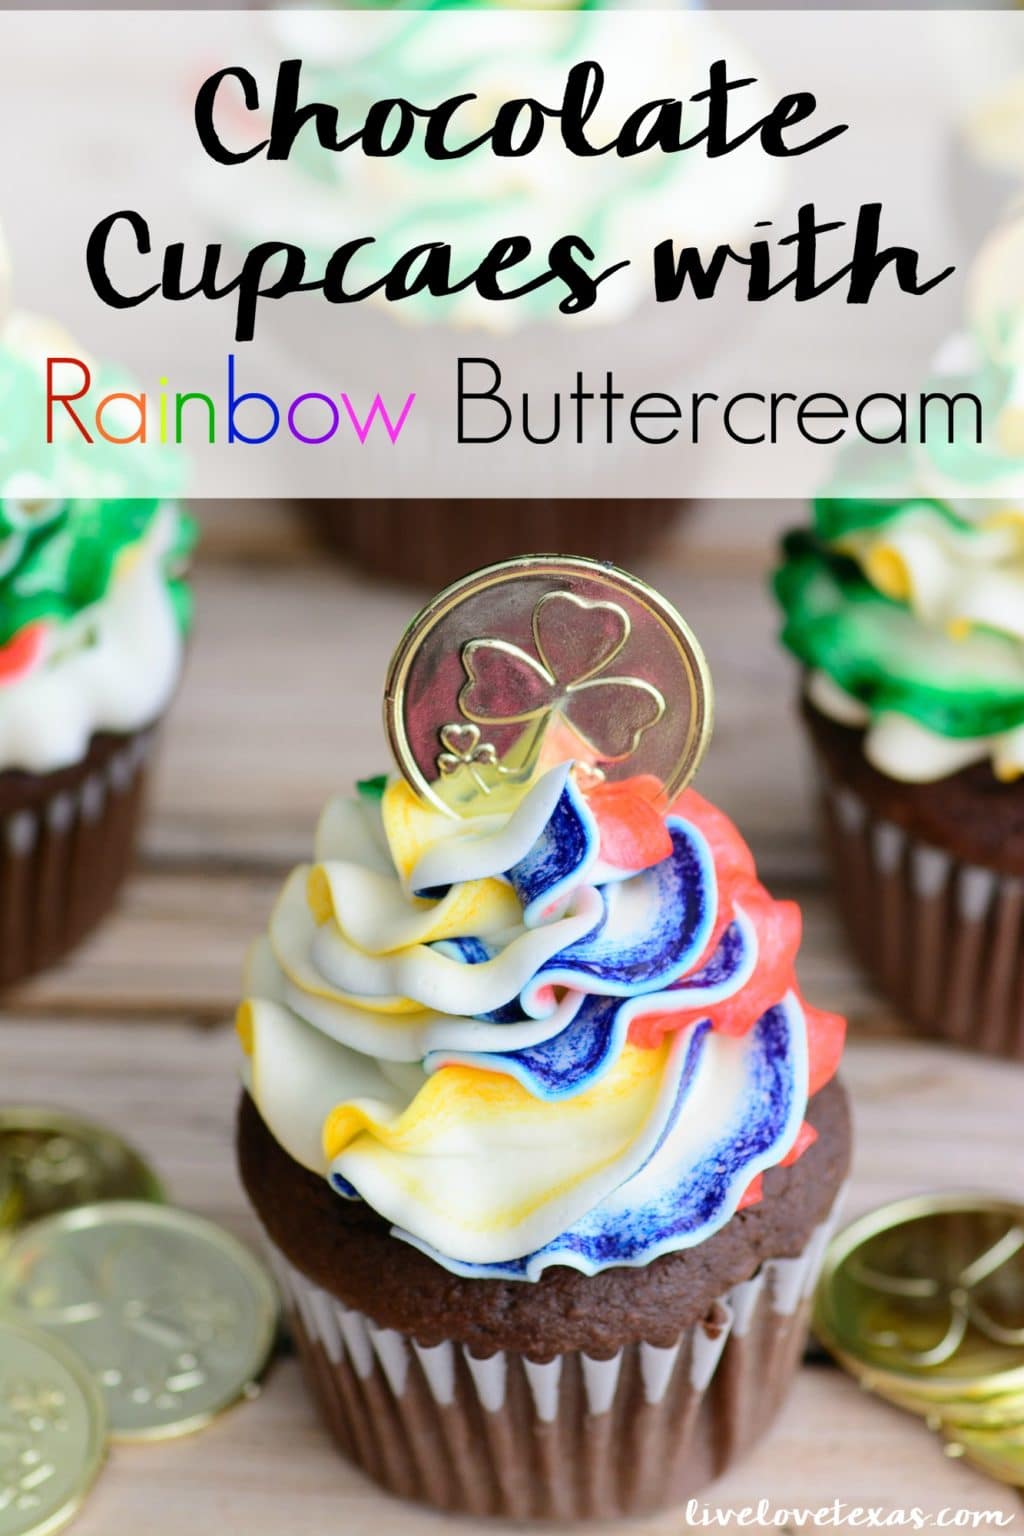 Looking for an eye-catching dessert recipe for St Patrick's Day? Check out these Easy Chocolate Cupcakes Recipe from Scratch + Rainbow Buttercream Frosting! #cupcakes #cupcakerecipes #rainbowdesserts #rainbowcupcakes #rainbowrecipes